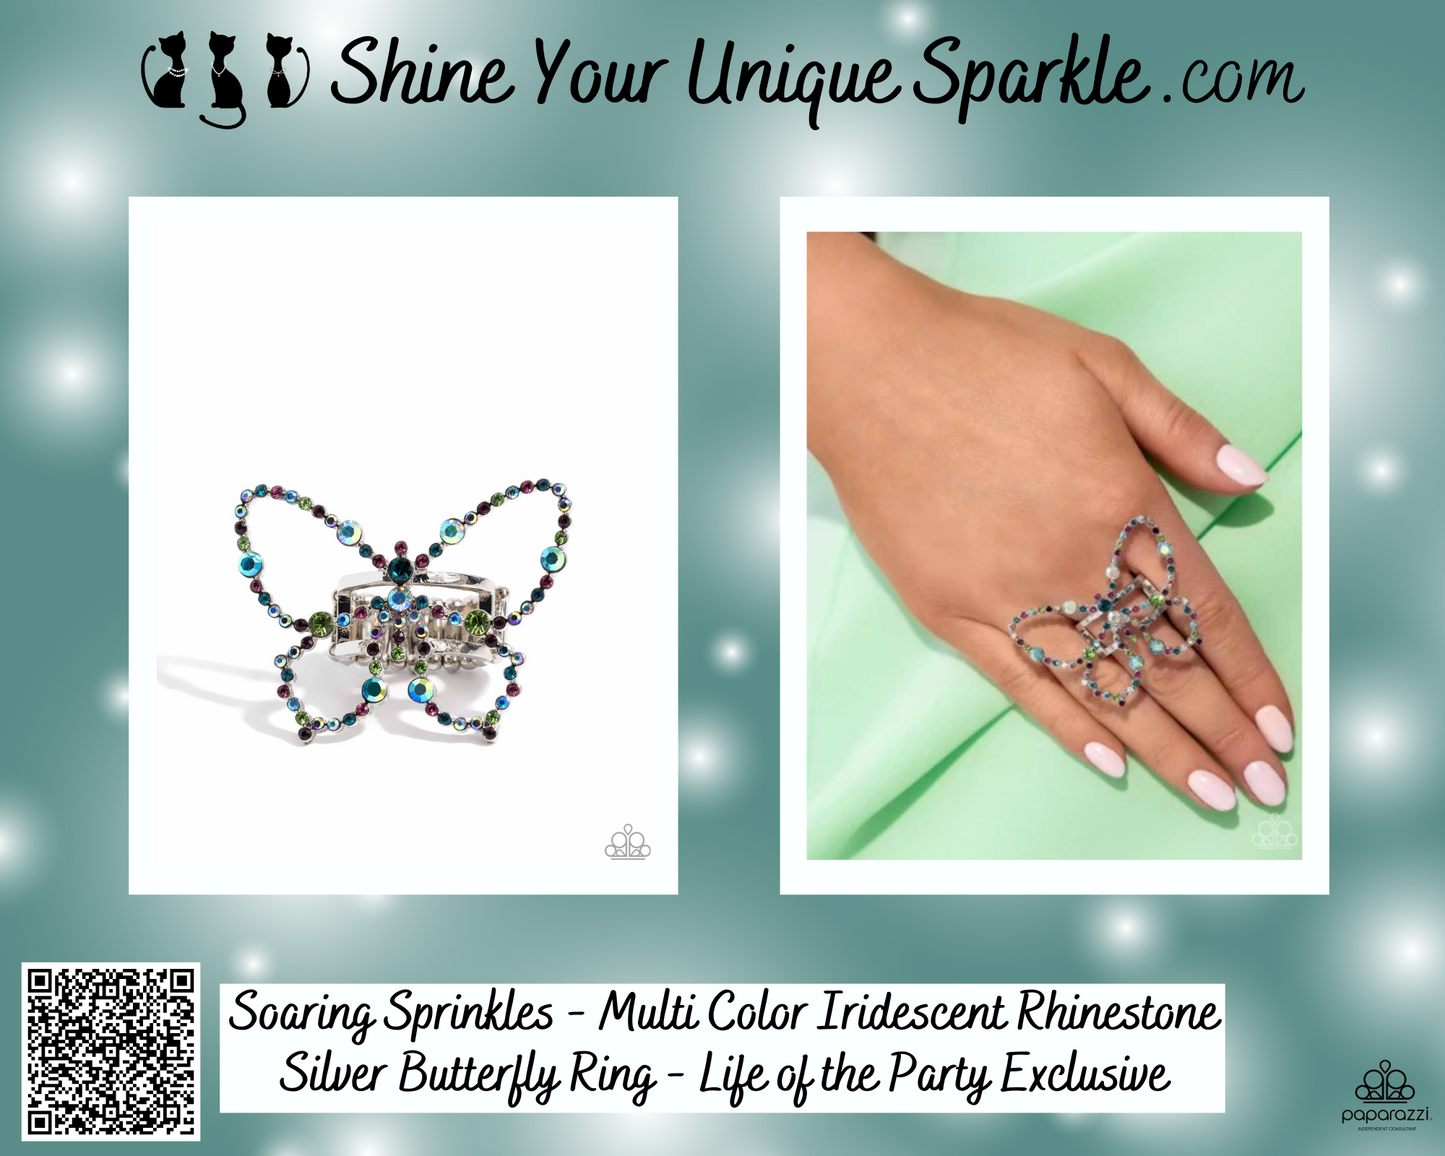 Soaring Sprinkles - Multi Color Iridescent Rhinestone Silver Butterfly Ring - Life of the Party Exclusive